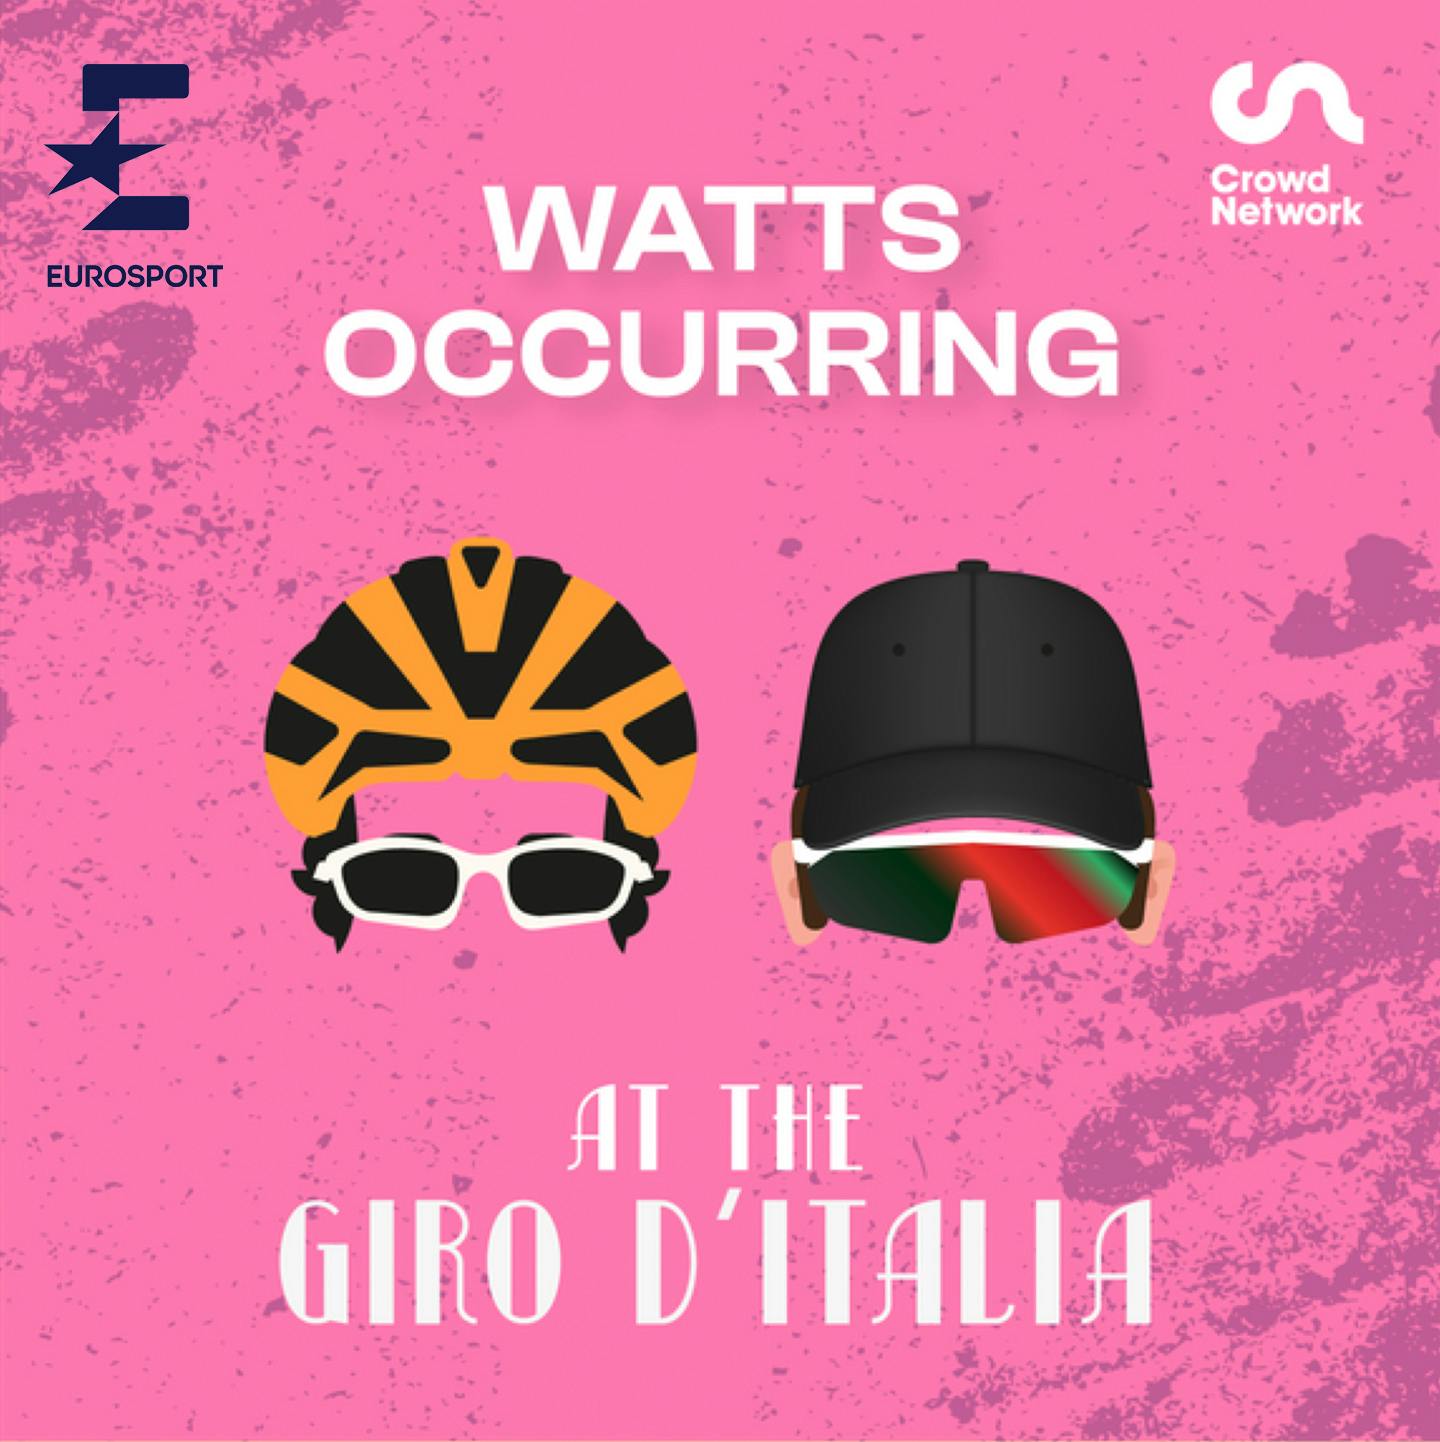 Chasing Pogacar's greatness on the Queen stage | Giro d'Italia stage 15 - Watts Occurring powered by Eurosport